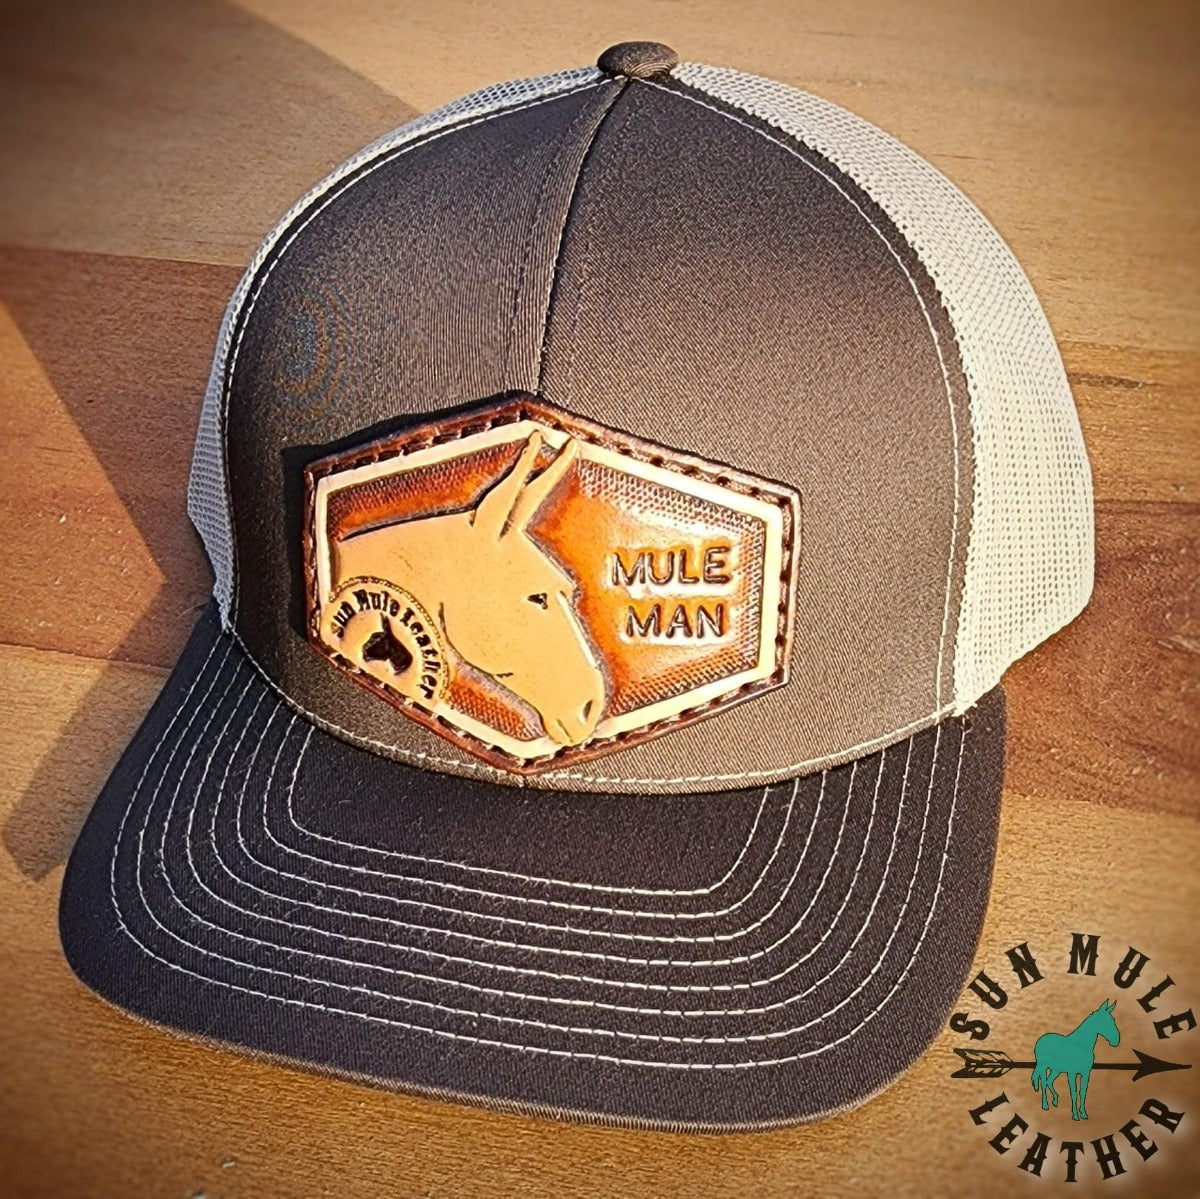 Brown trucker hat with handtooled leather patch of a mule and the stamped letters "Mule Man" cap.